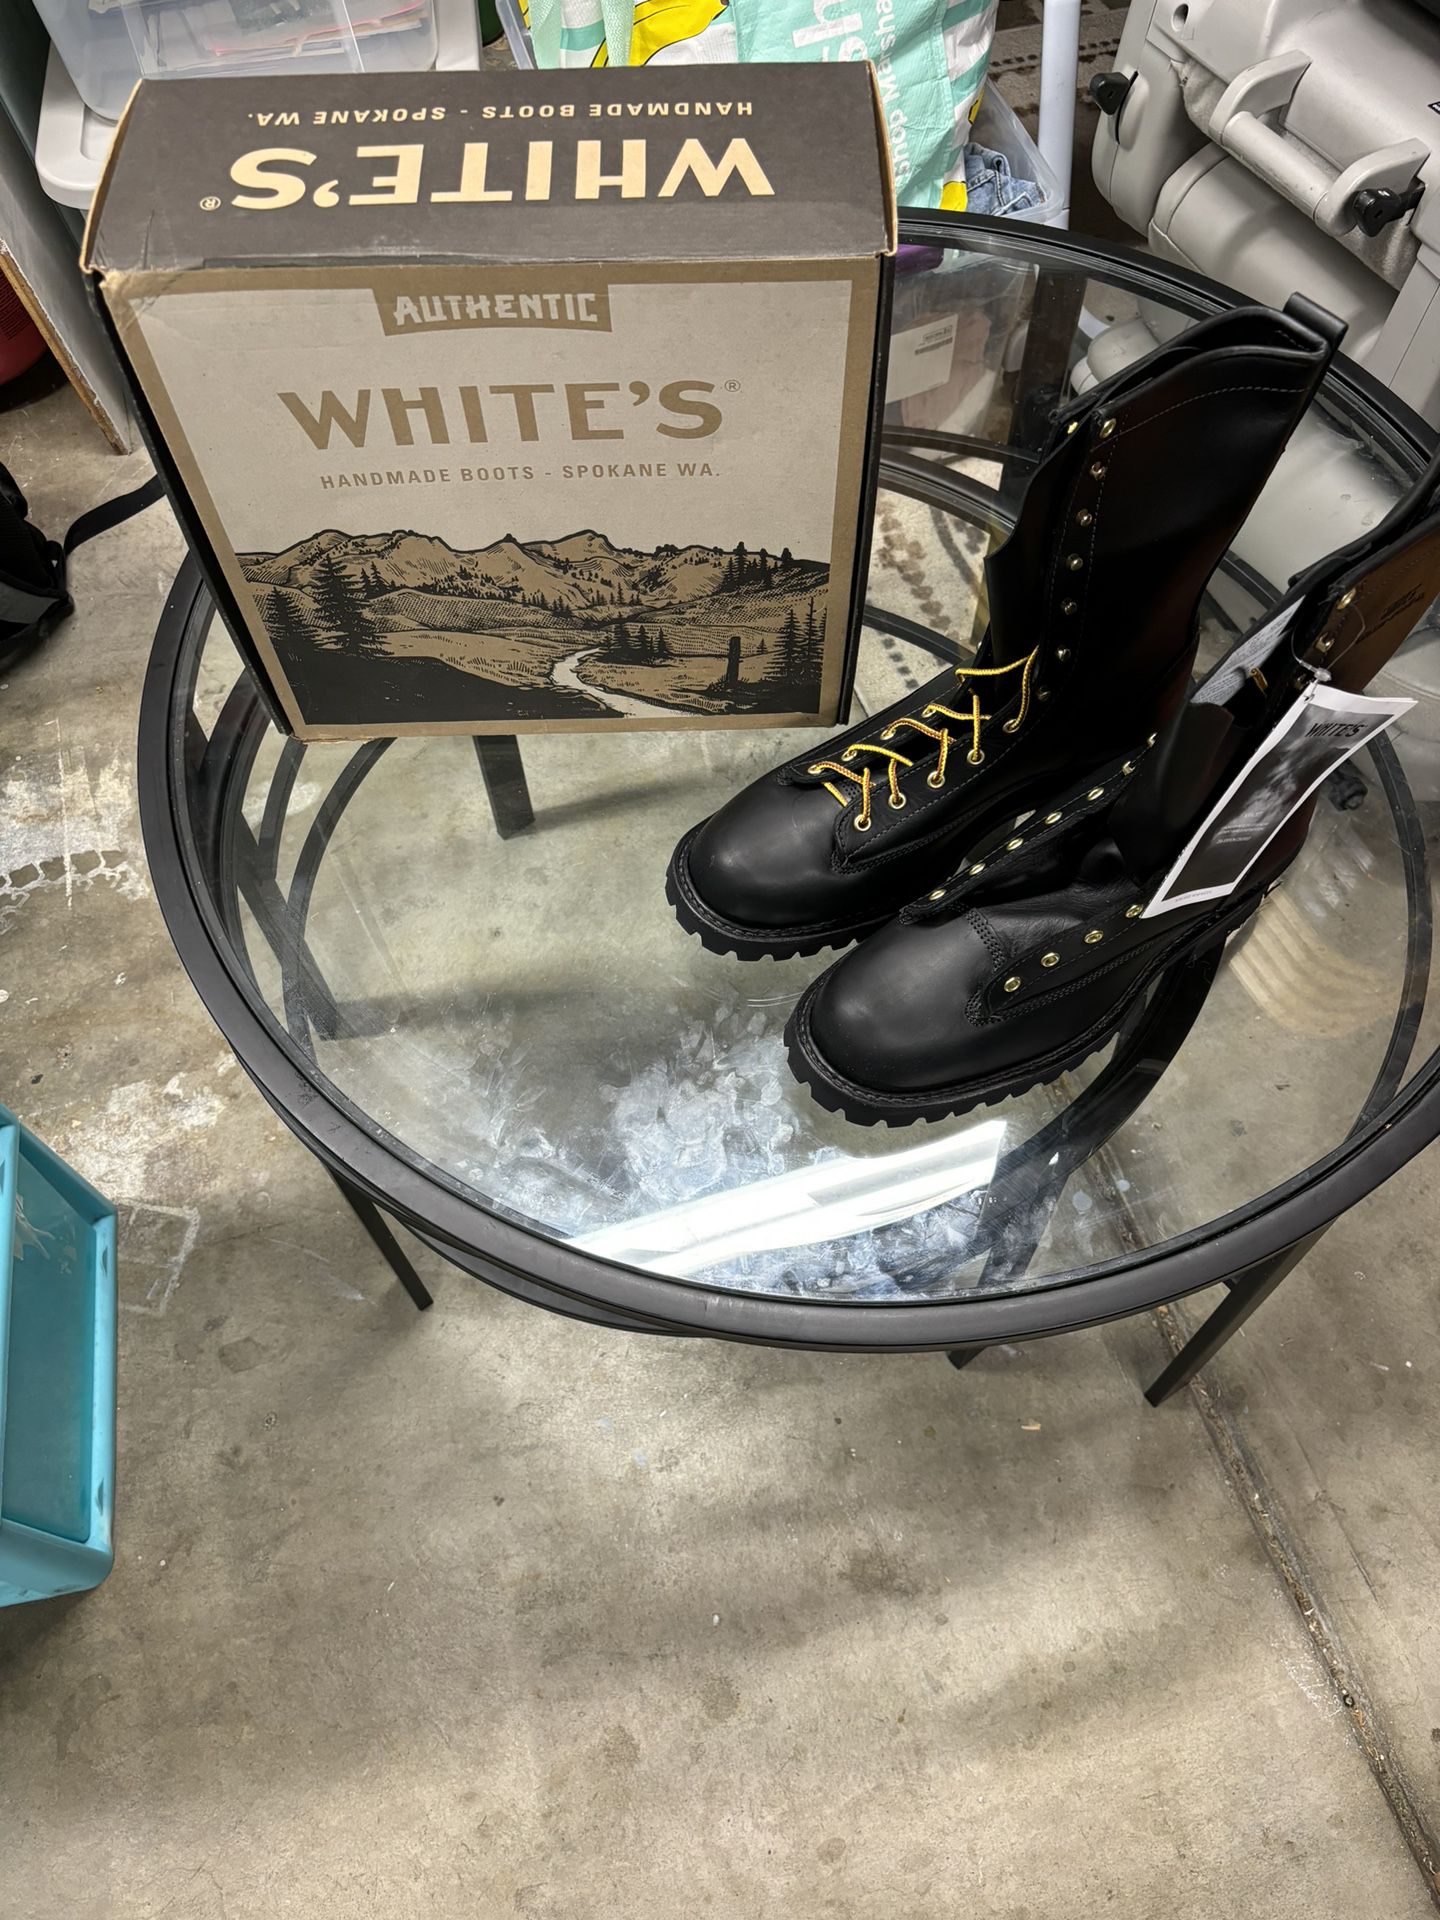 White’s - Wild-land Firefighter Boots